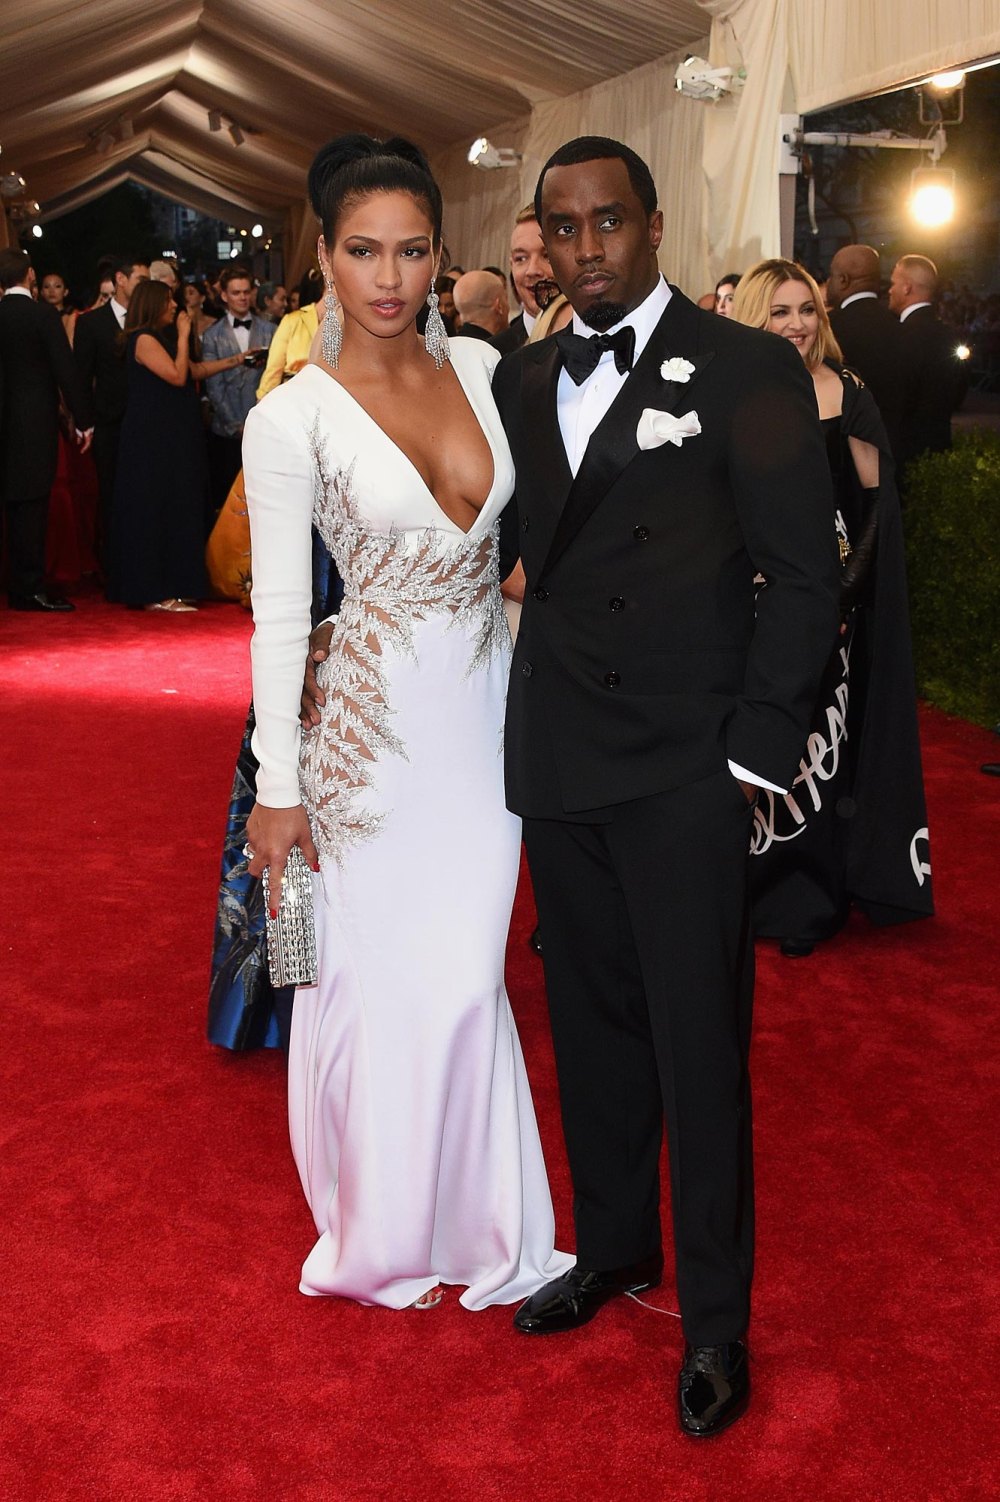 Sean Diddy Combs and Ex Girlfriend Cassie s Relationship Ups and Downs A Timeline 229